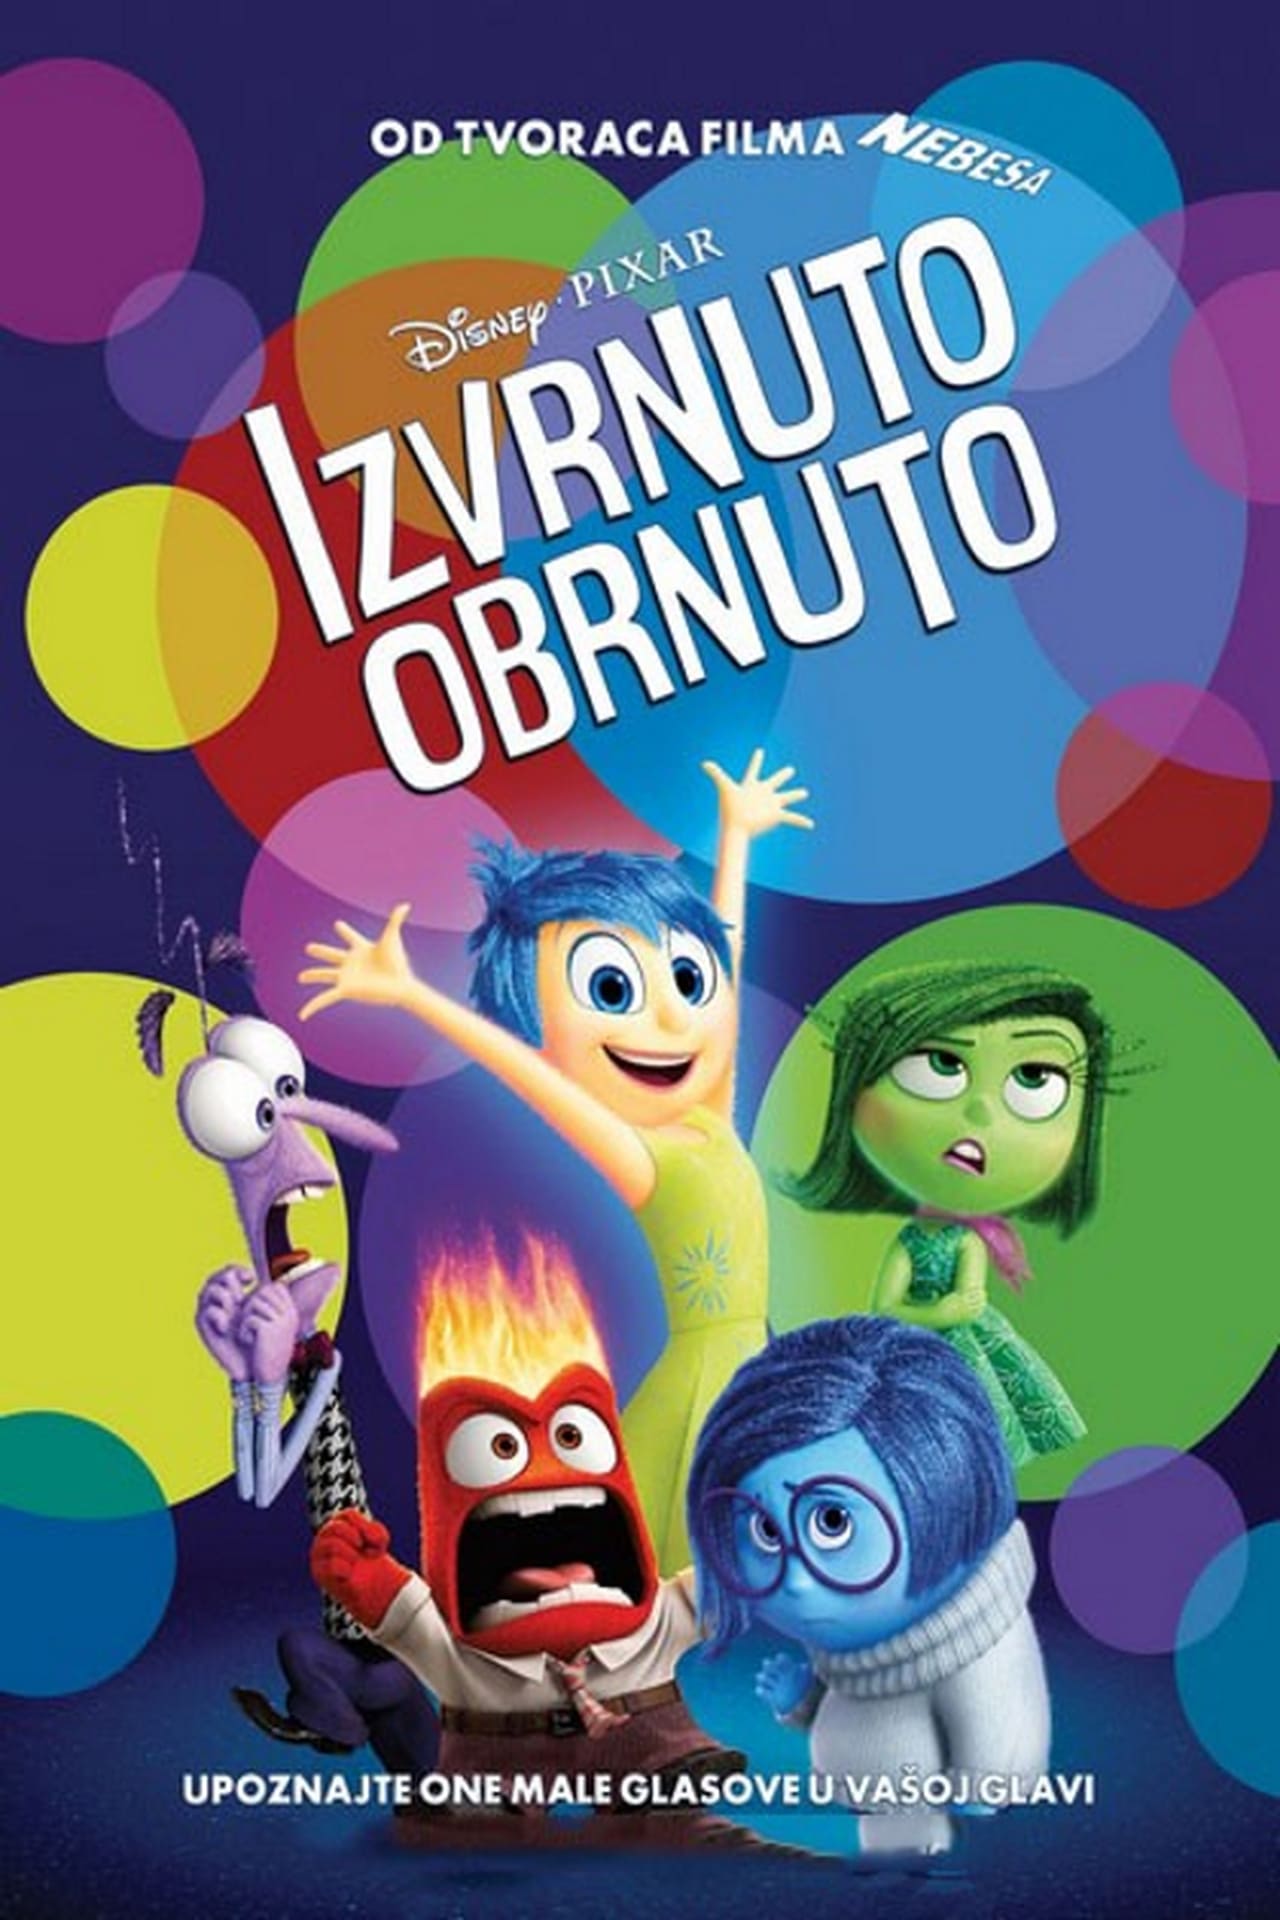 Inside Out (2015) Movie Synopsis, Summary, Plot & Film Details